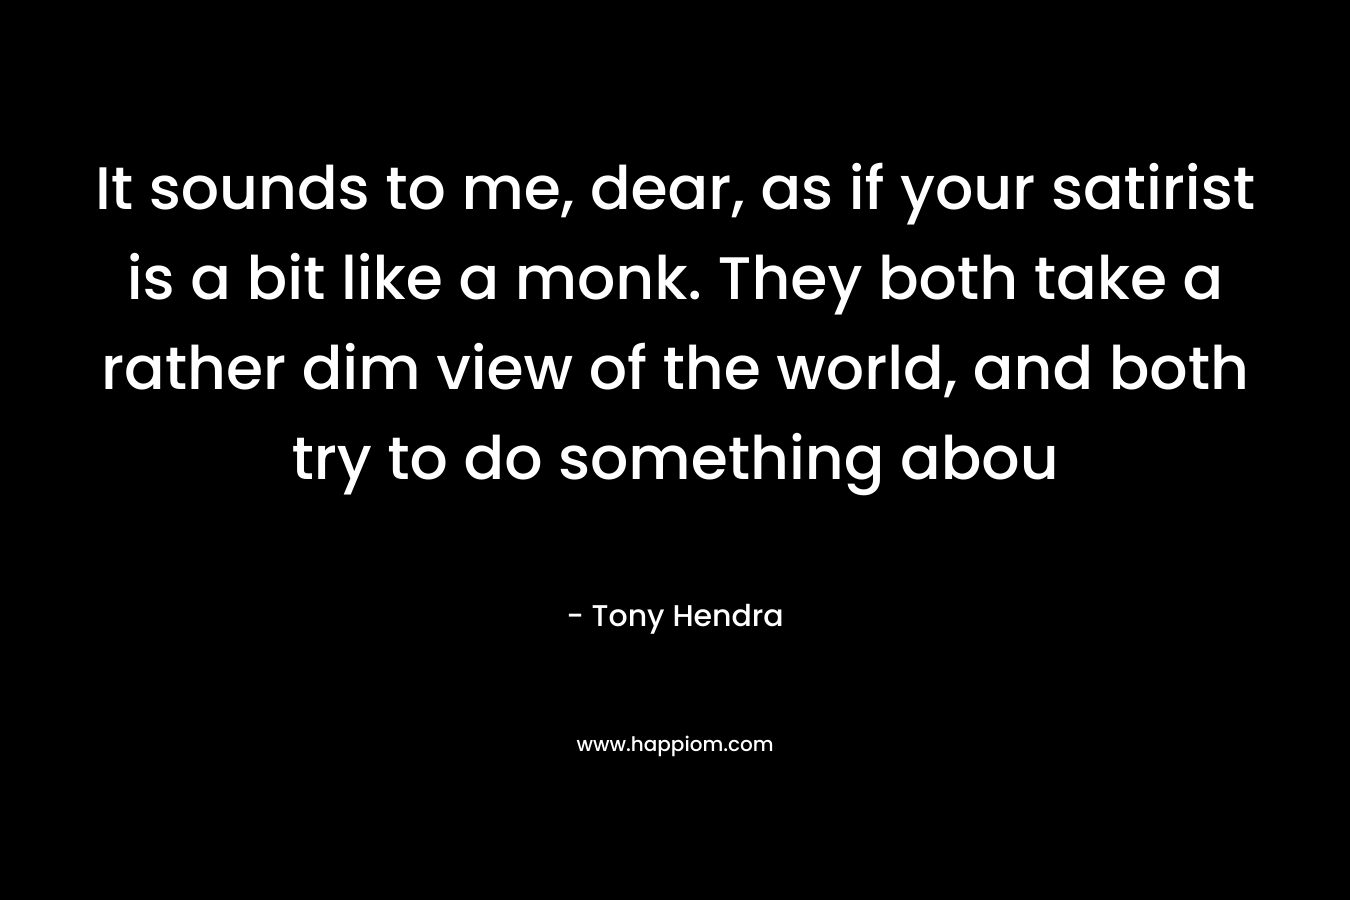 It sounds to me, dear, as if your satirist is a bit like a monk. They both take a rather dim view of the world, and both try to do something abou – Tony Hendra